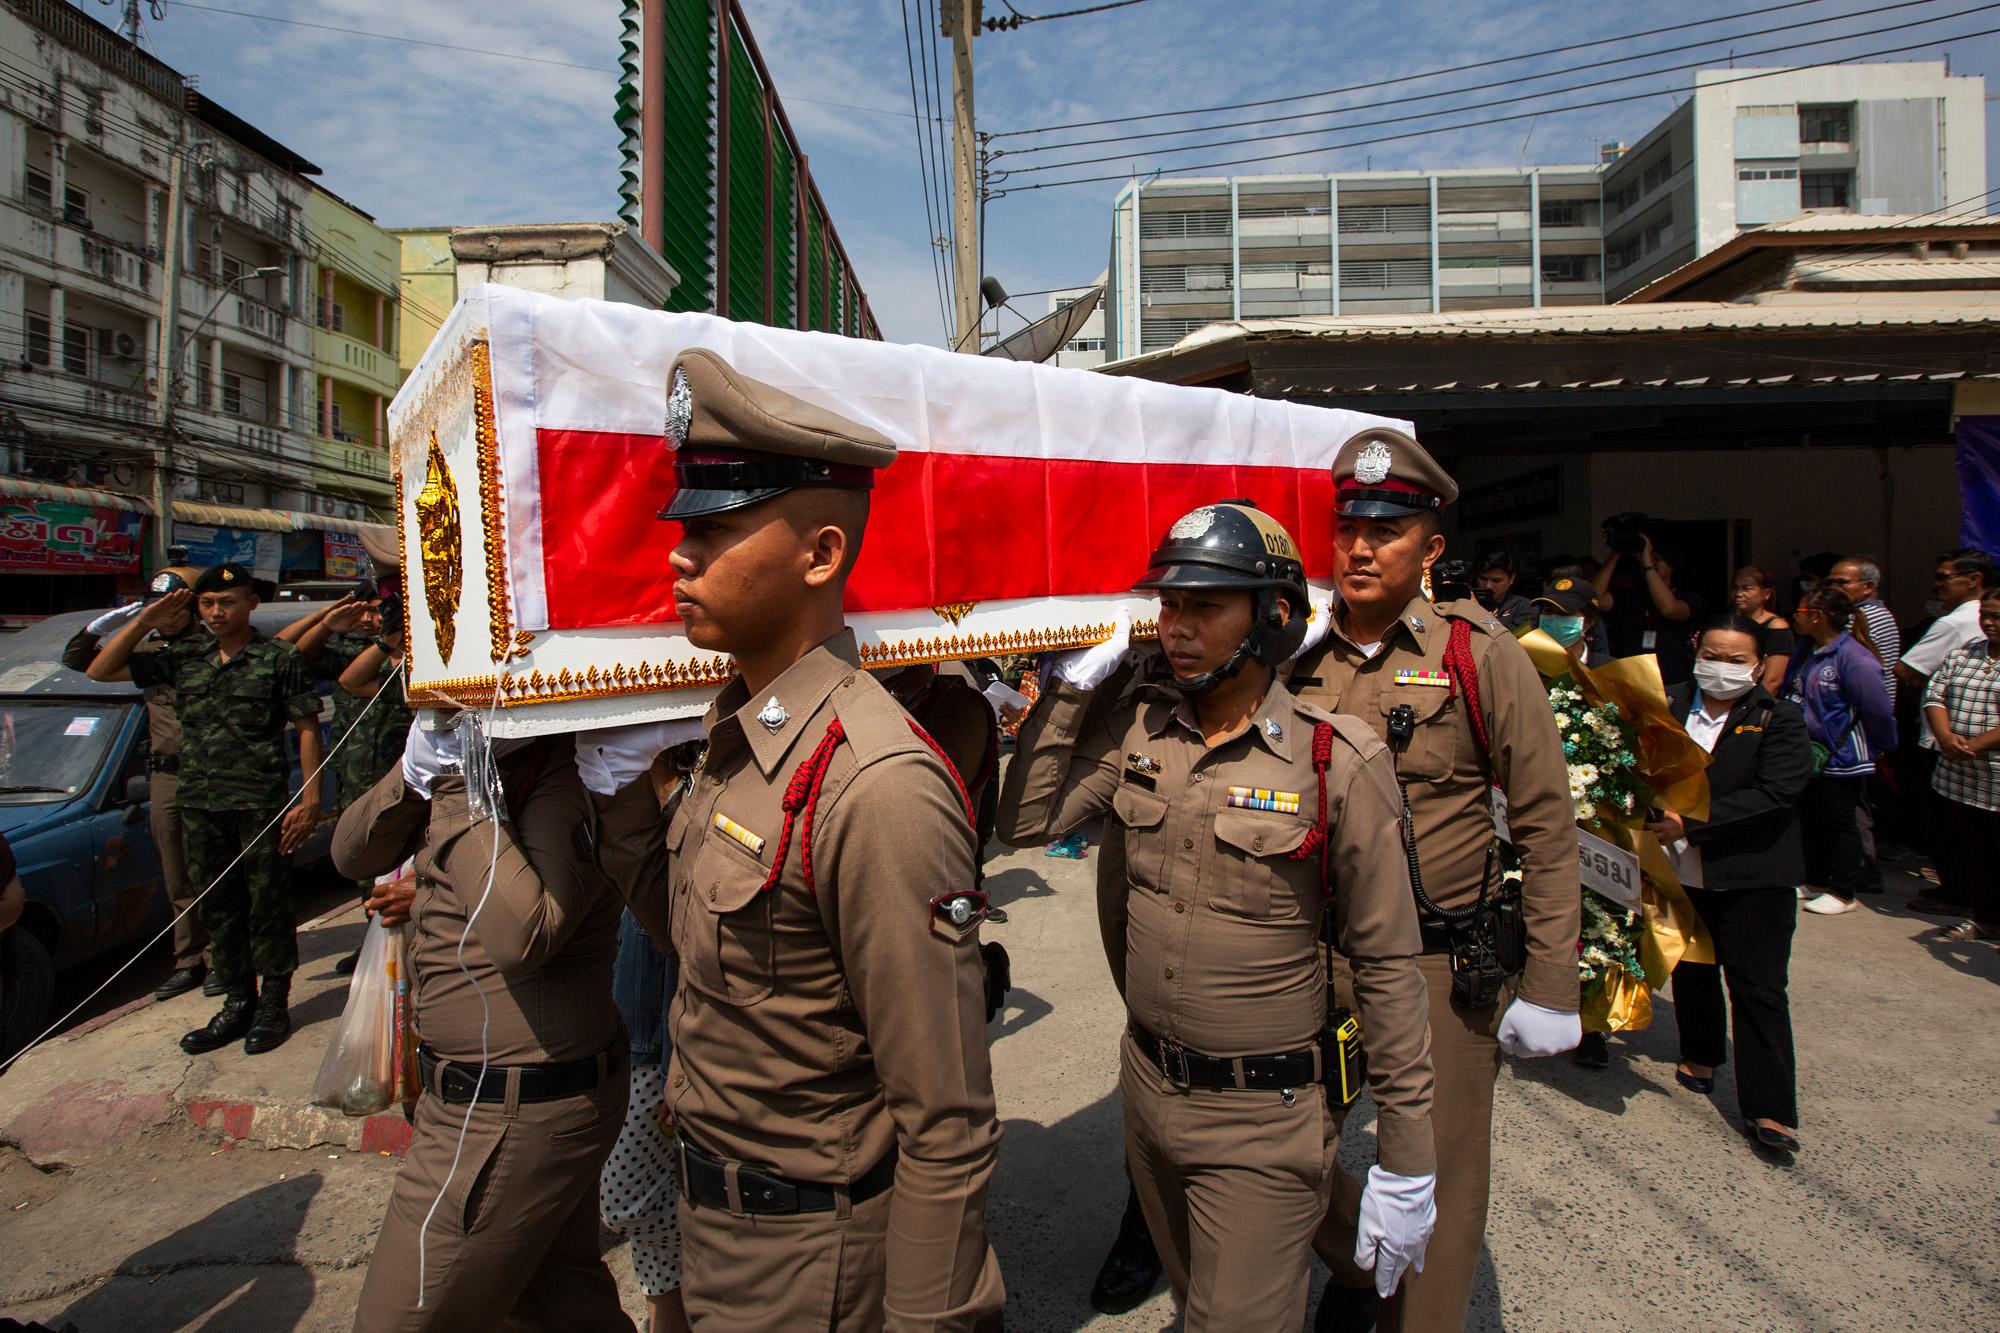 A funeral procession for police sergeant, Chatchawal Thaengthong, who was killed while responding to the mass shooting perpetrated by Seargent...